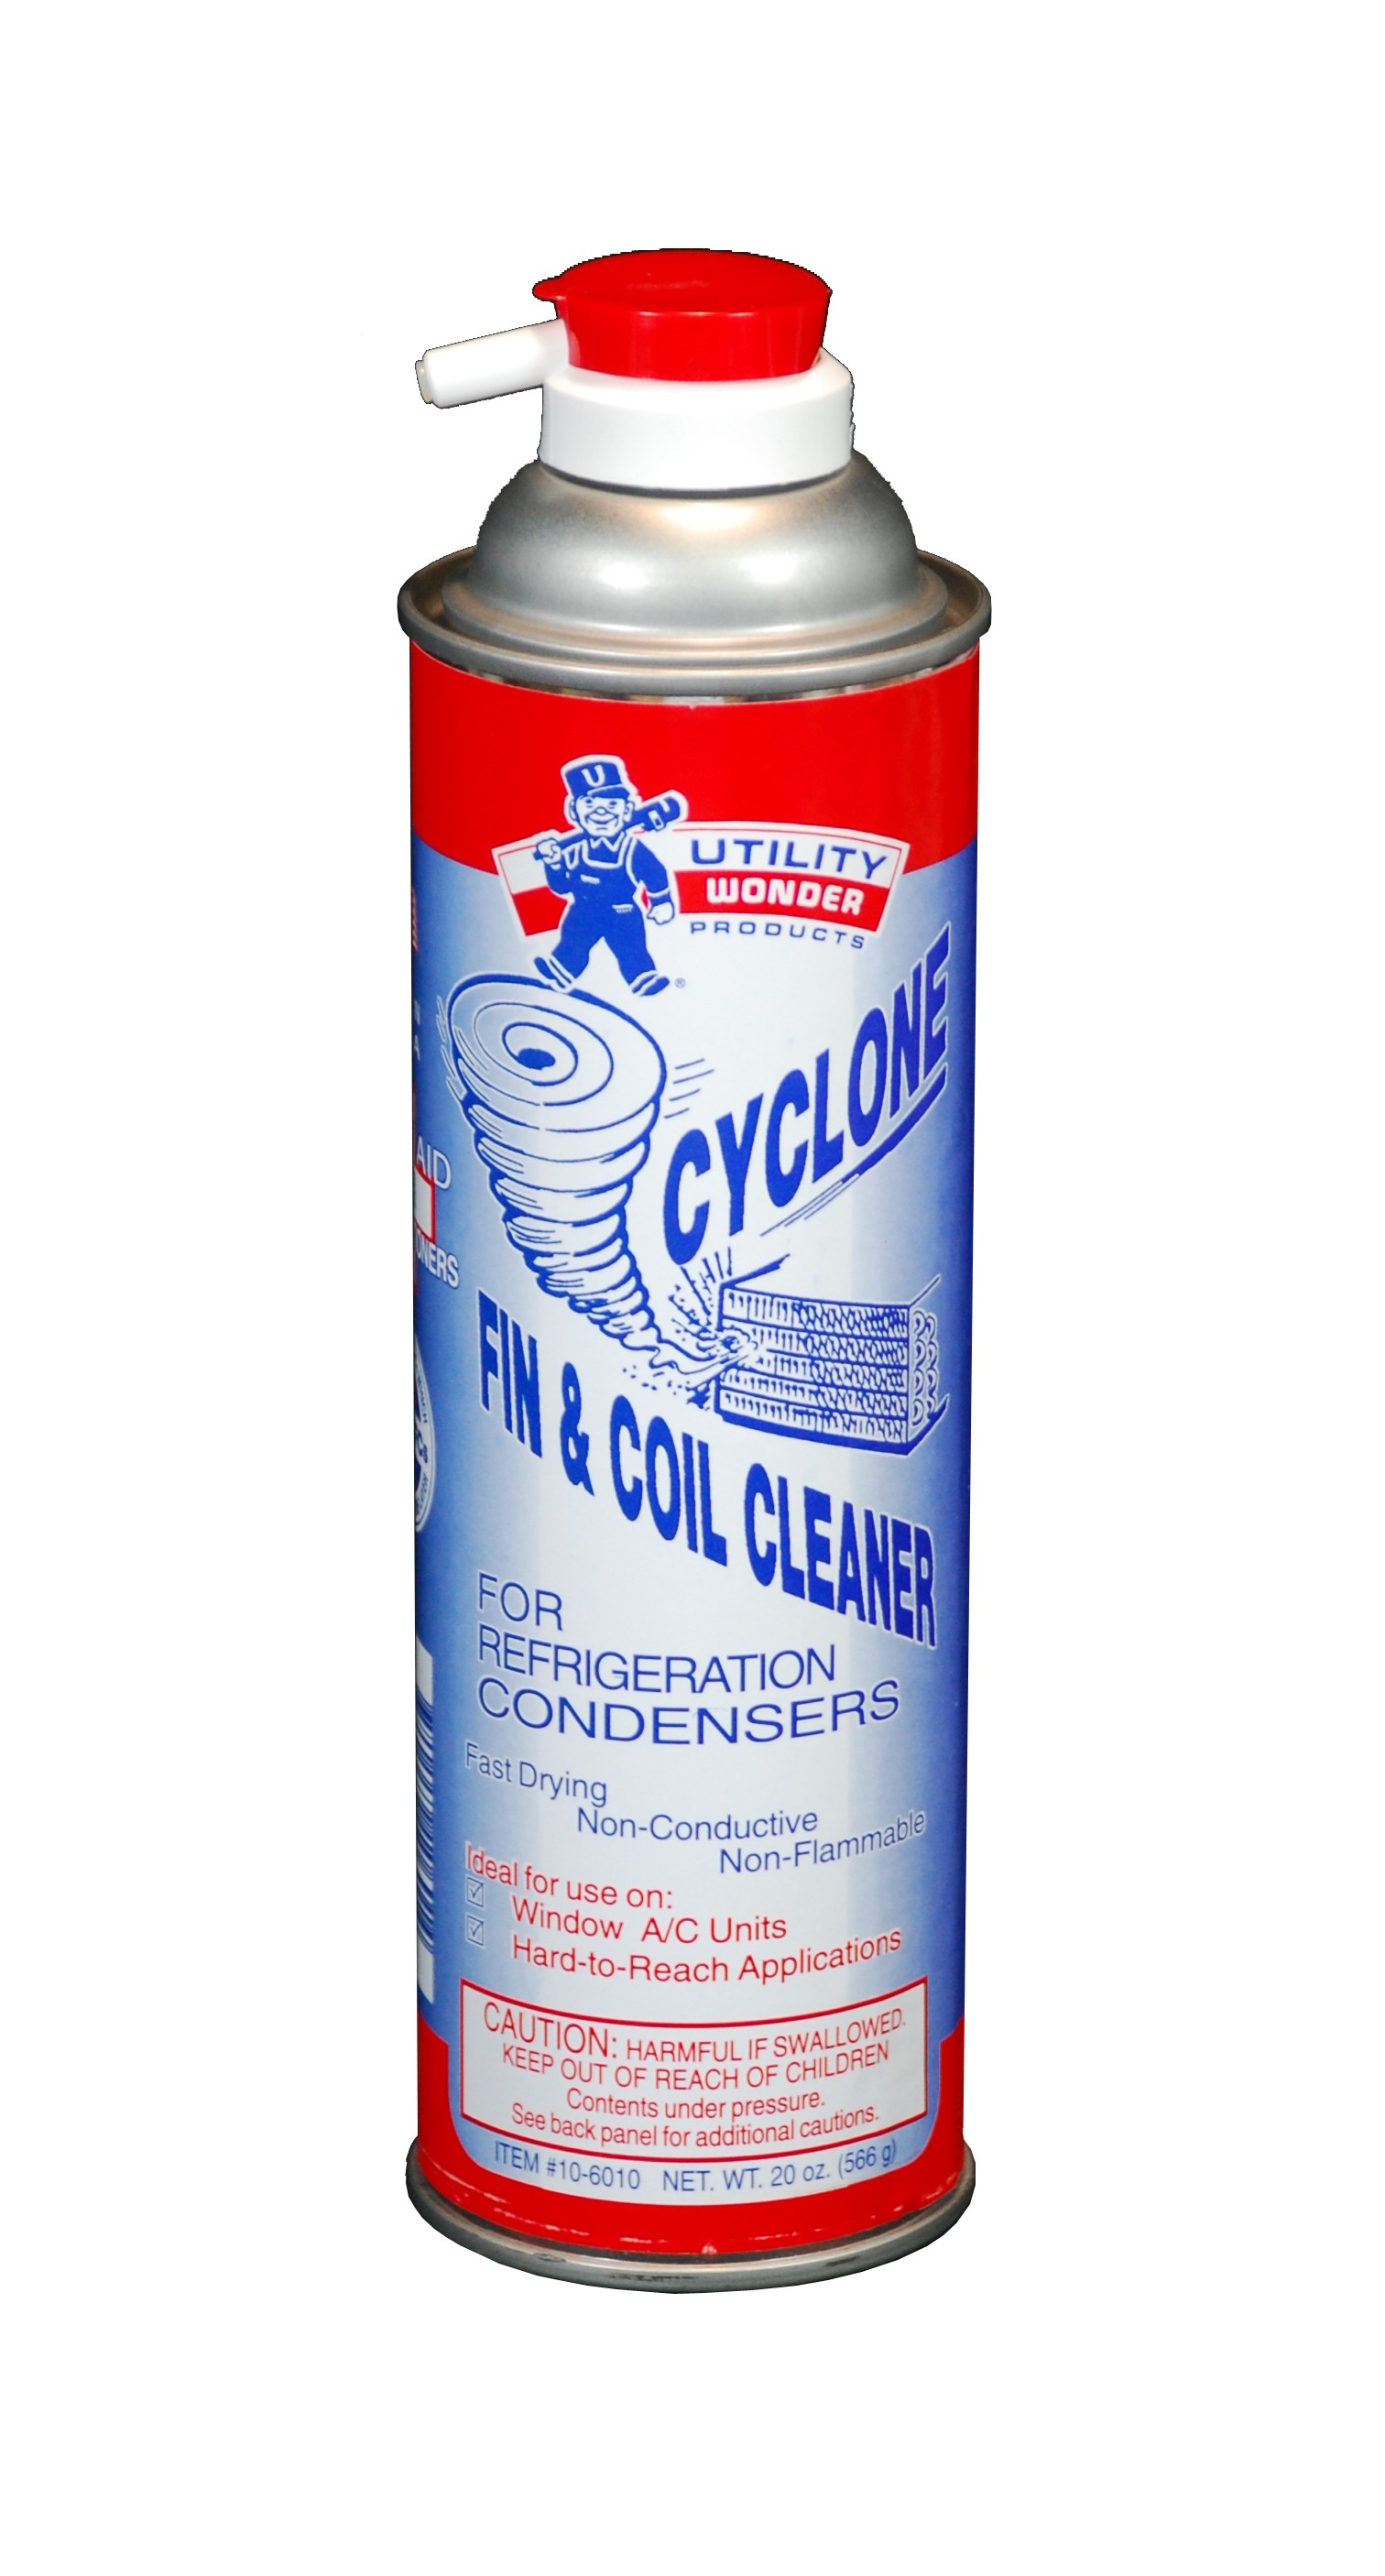 CYCLONE FIN & COIL CLEANER